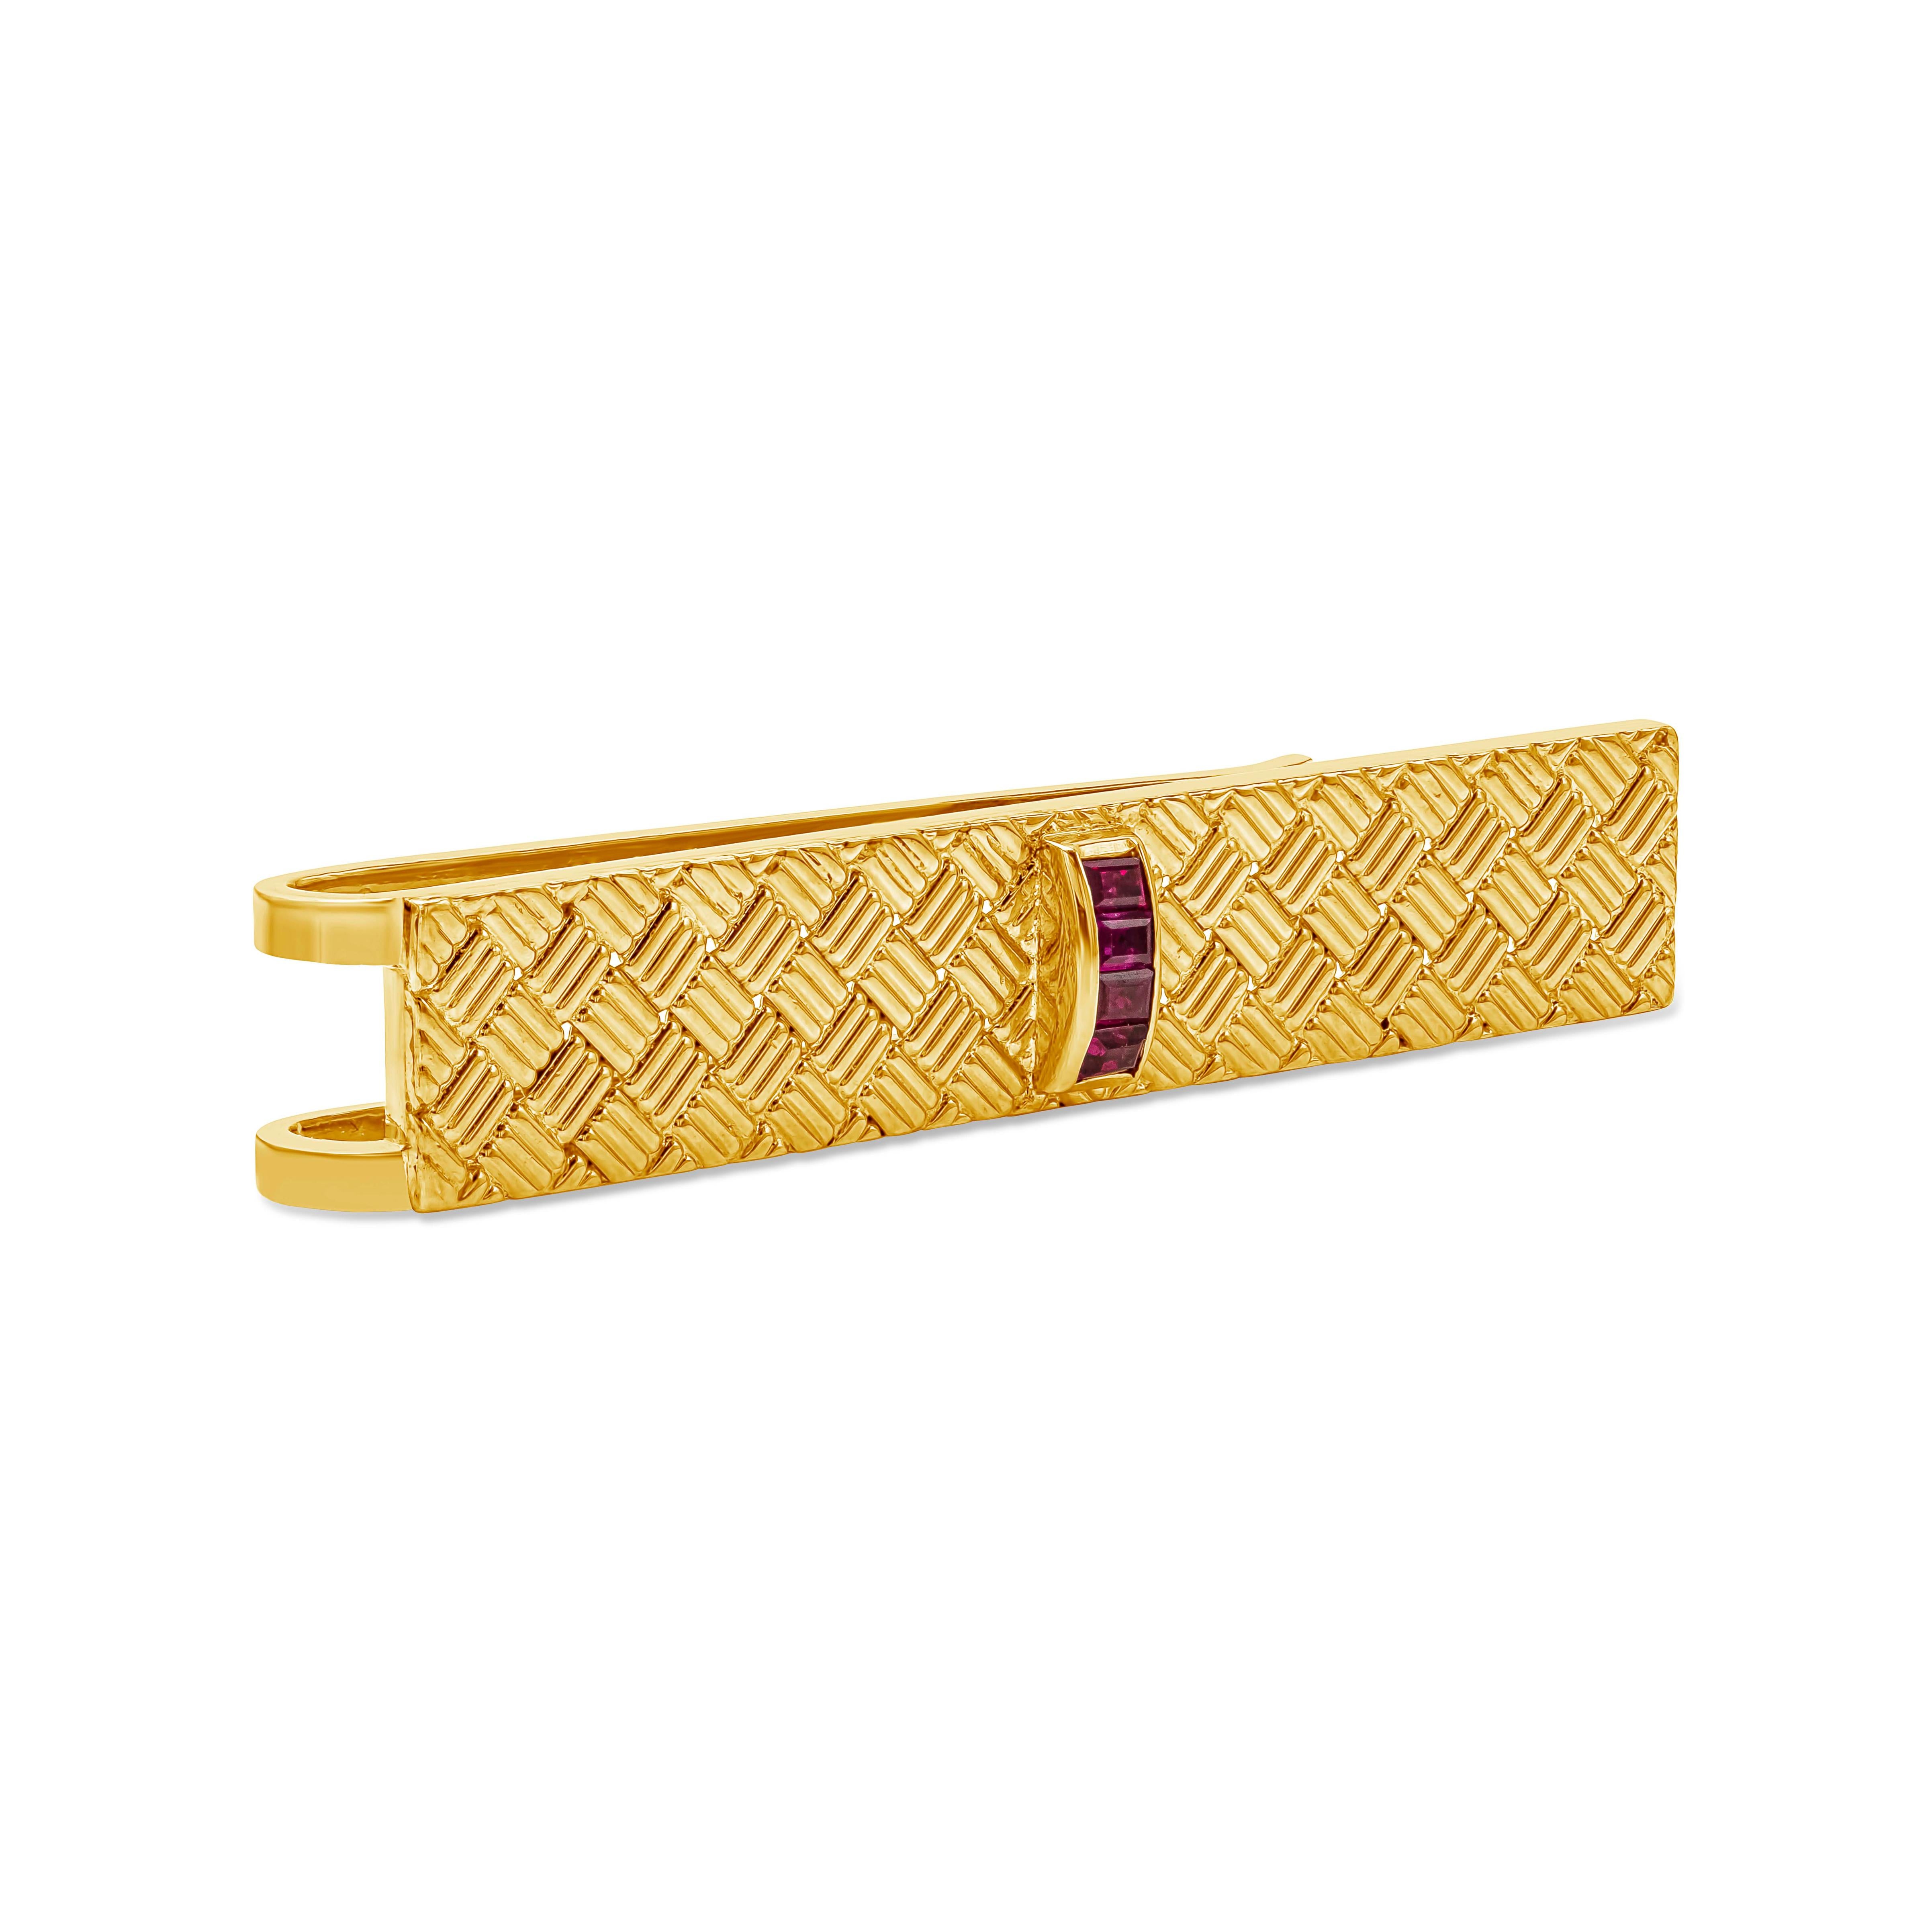 Made and signed by Tiffany & Co. Features a weave design tie clip accented with three rubies in the middle. Rubies weigh 0.35 carats. Made in 18k yellow gold.